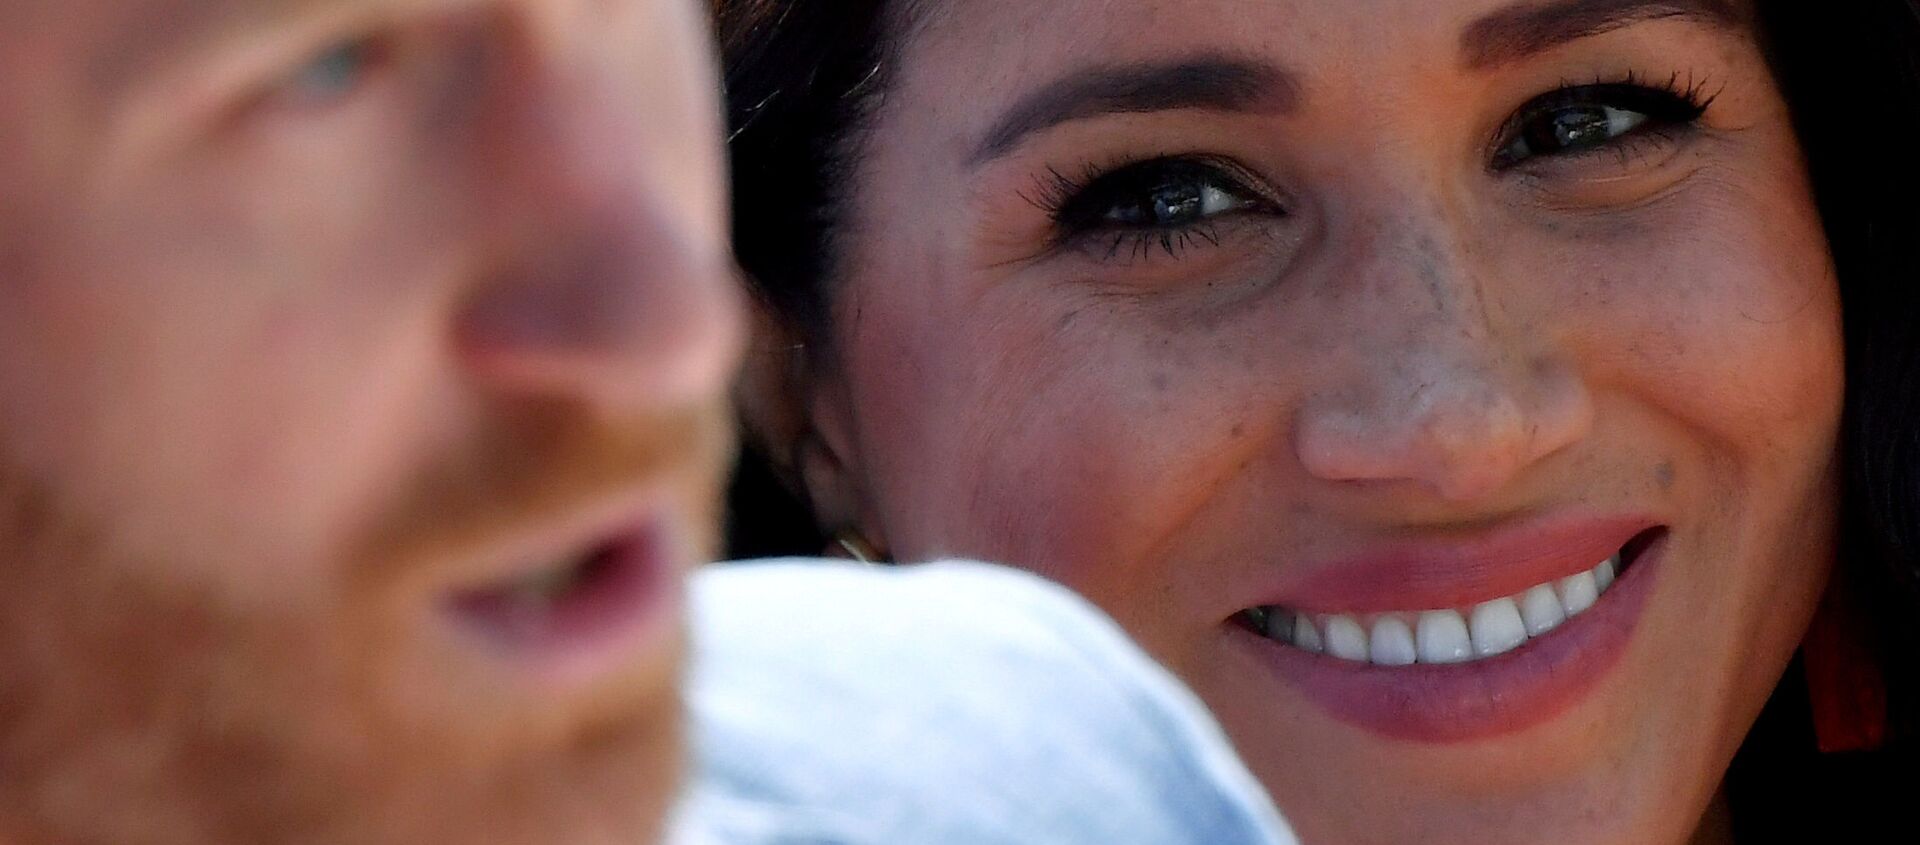 FILE PHOTO: Britain's Meghan, Duchess of Sussex, looks on as Prince Harry, Duke of Sussex, gives a speech, during a visit to the Youth Employment Services (YES) Hub in Tembisa township, near Johannesburg, South Africa, October 2, 2019 - Sputnik International, 1920, 18.03.2021